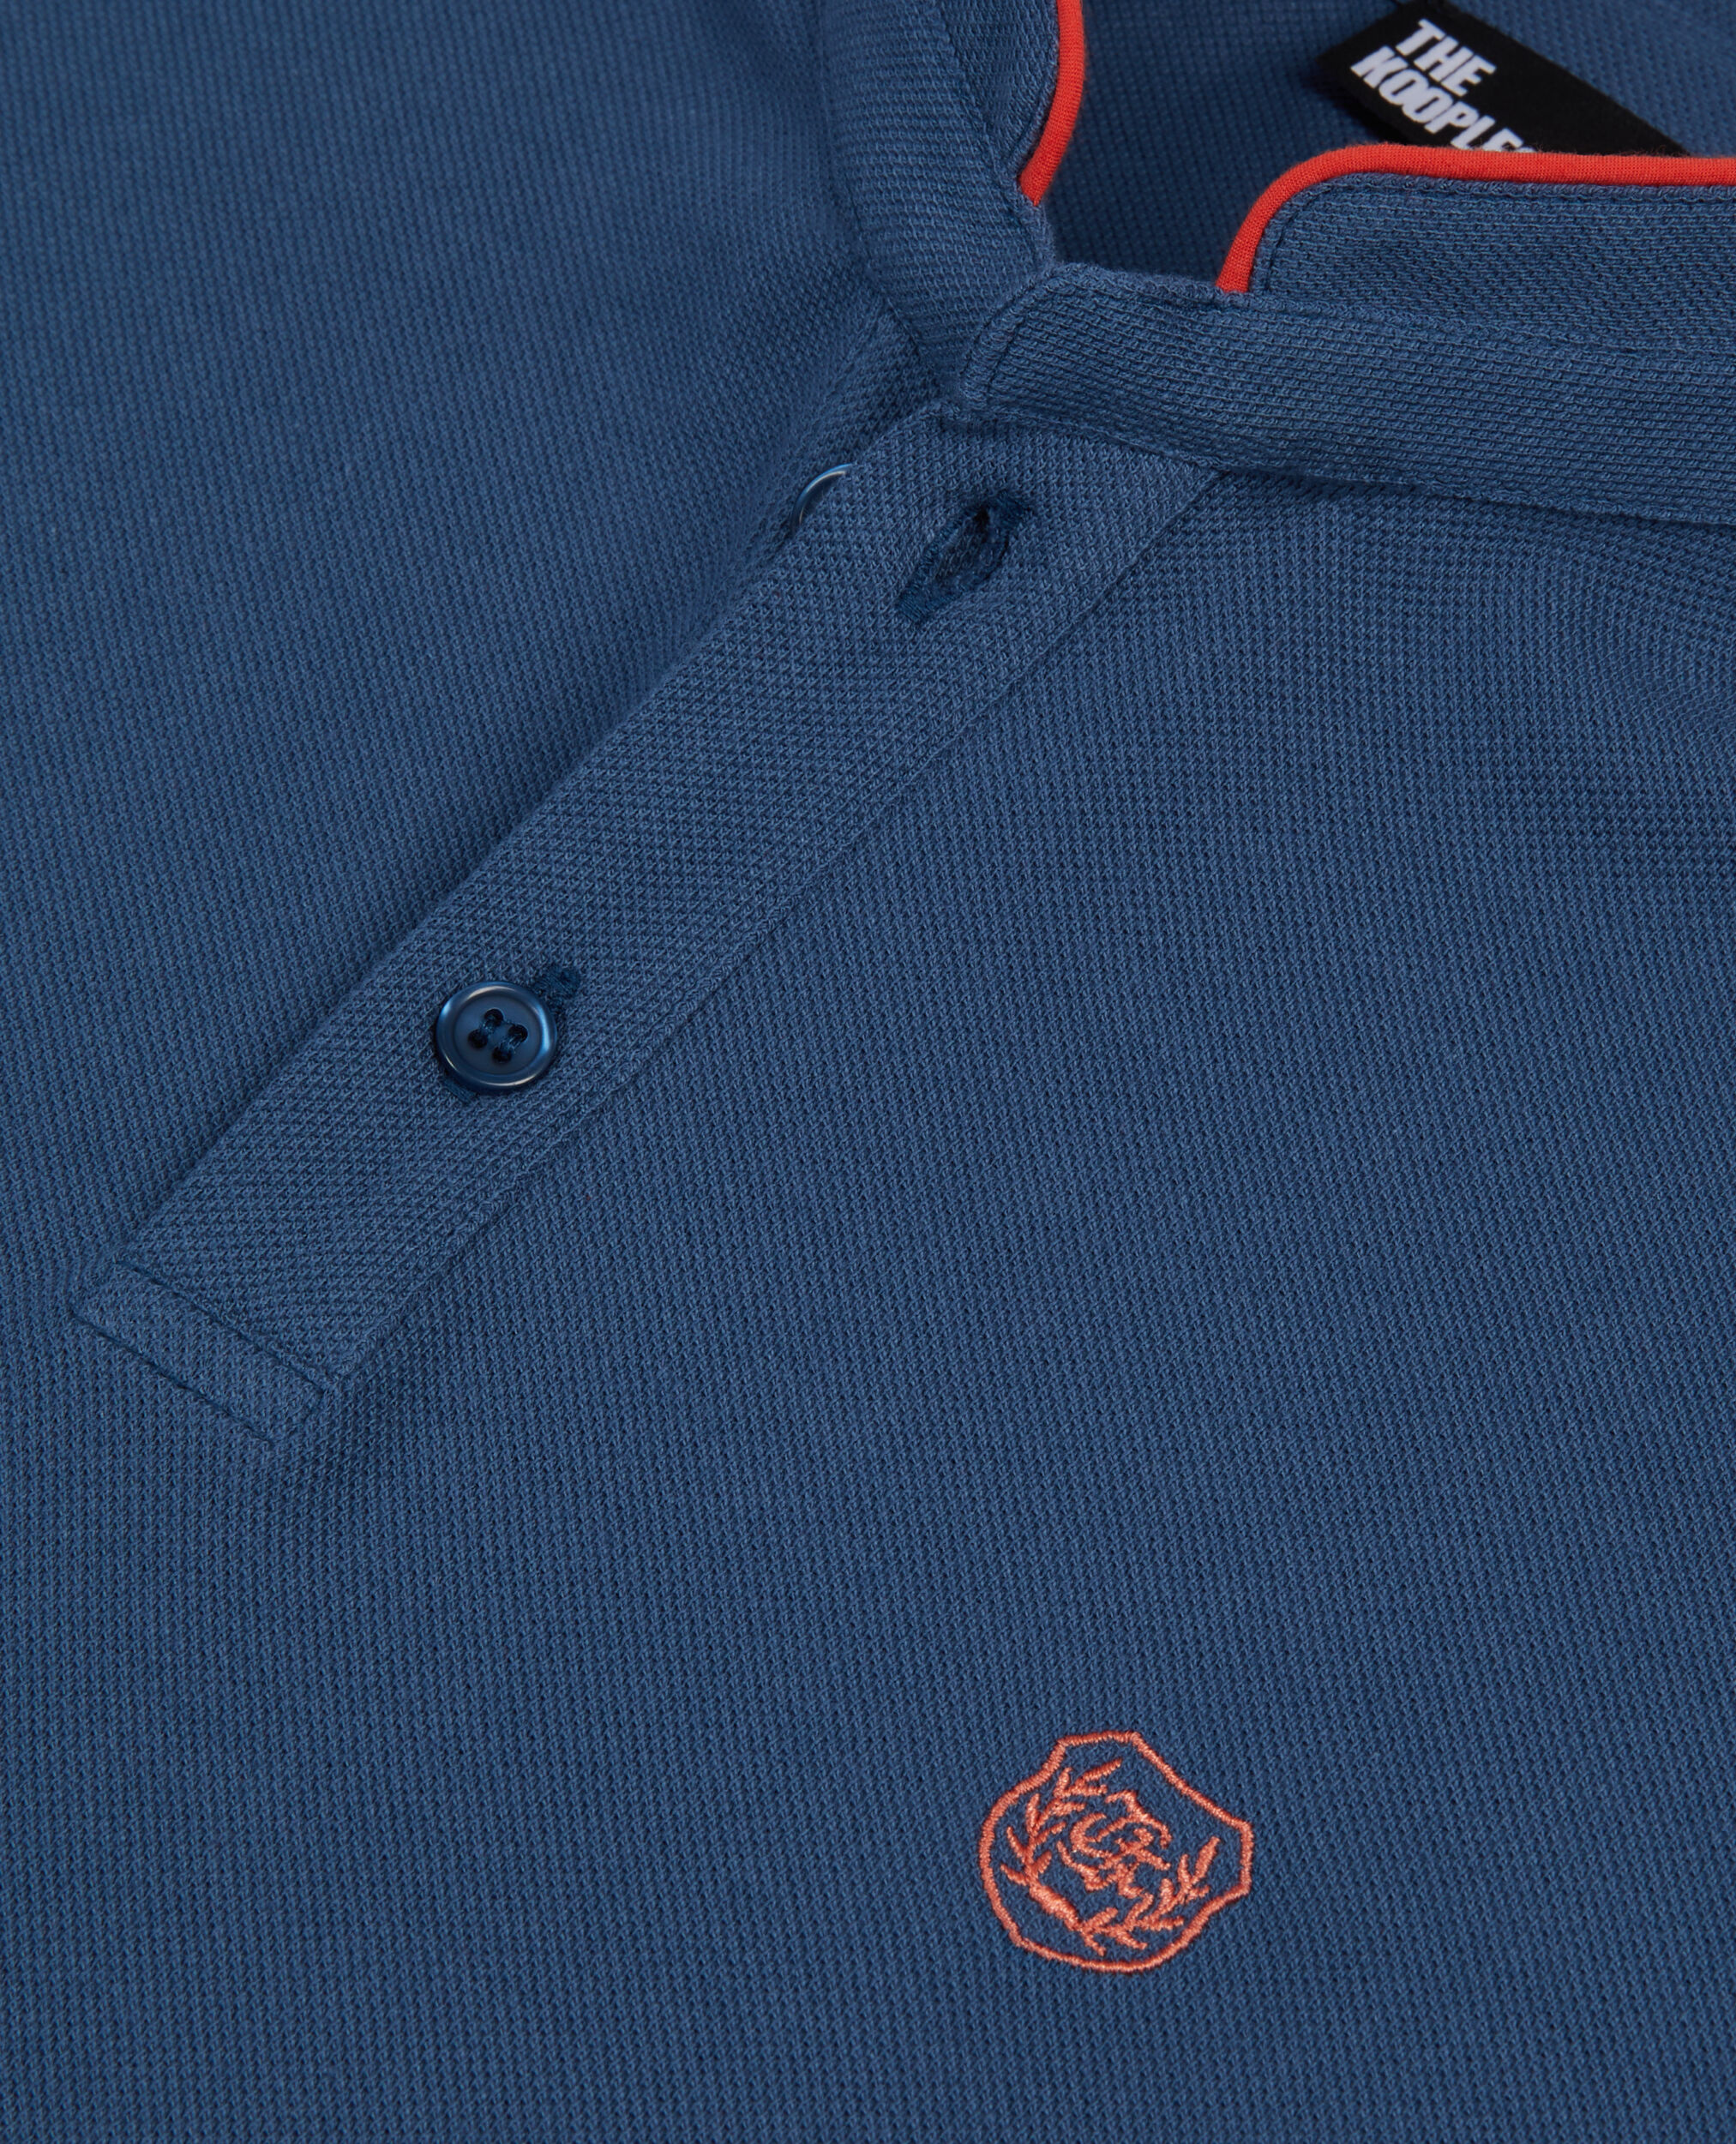 Royal blue cotton pique polo t-shirt, MIDDLE NAVY, hi-res image number null